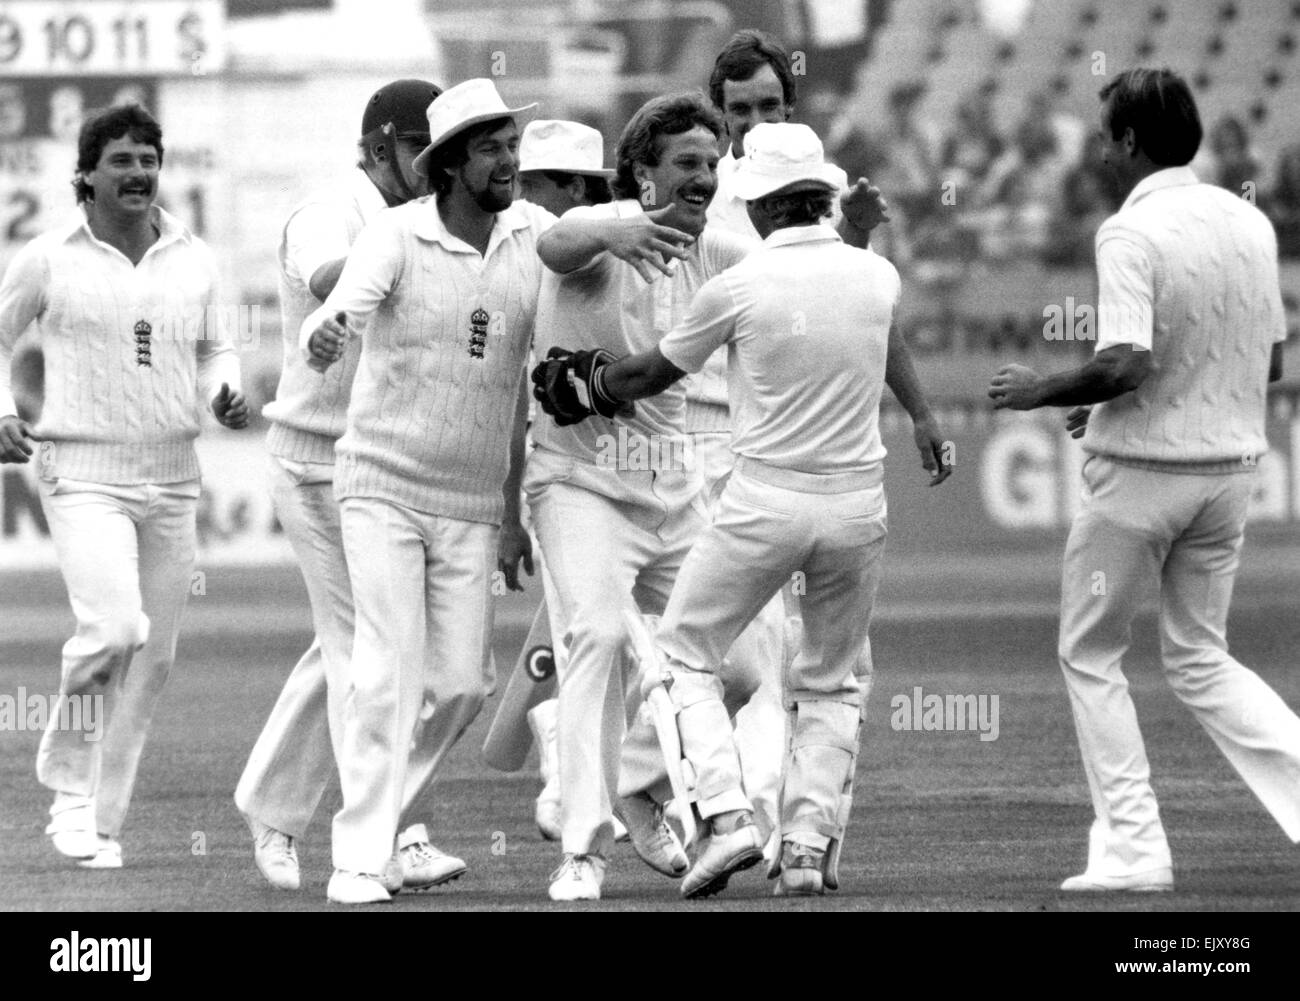 England v Pakistan. Ian Botham celebrates with keeper Bob Taylor after the wicket that took Pakistan to 0 for 6. 3rd August 1982. Stock Photo